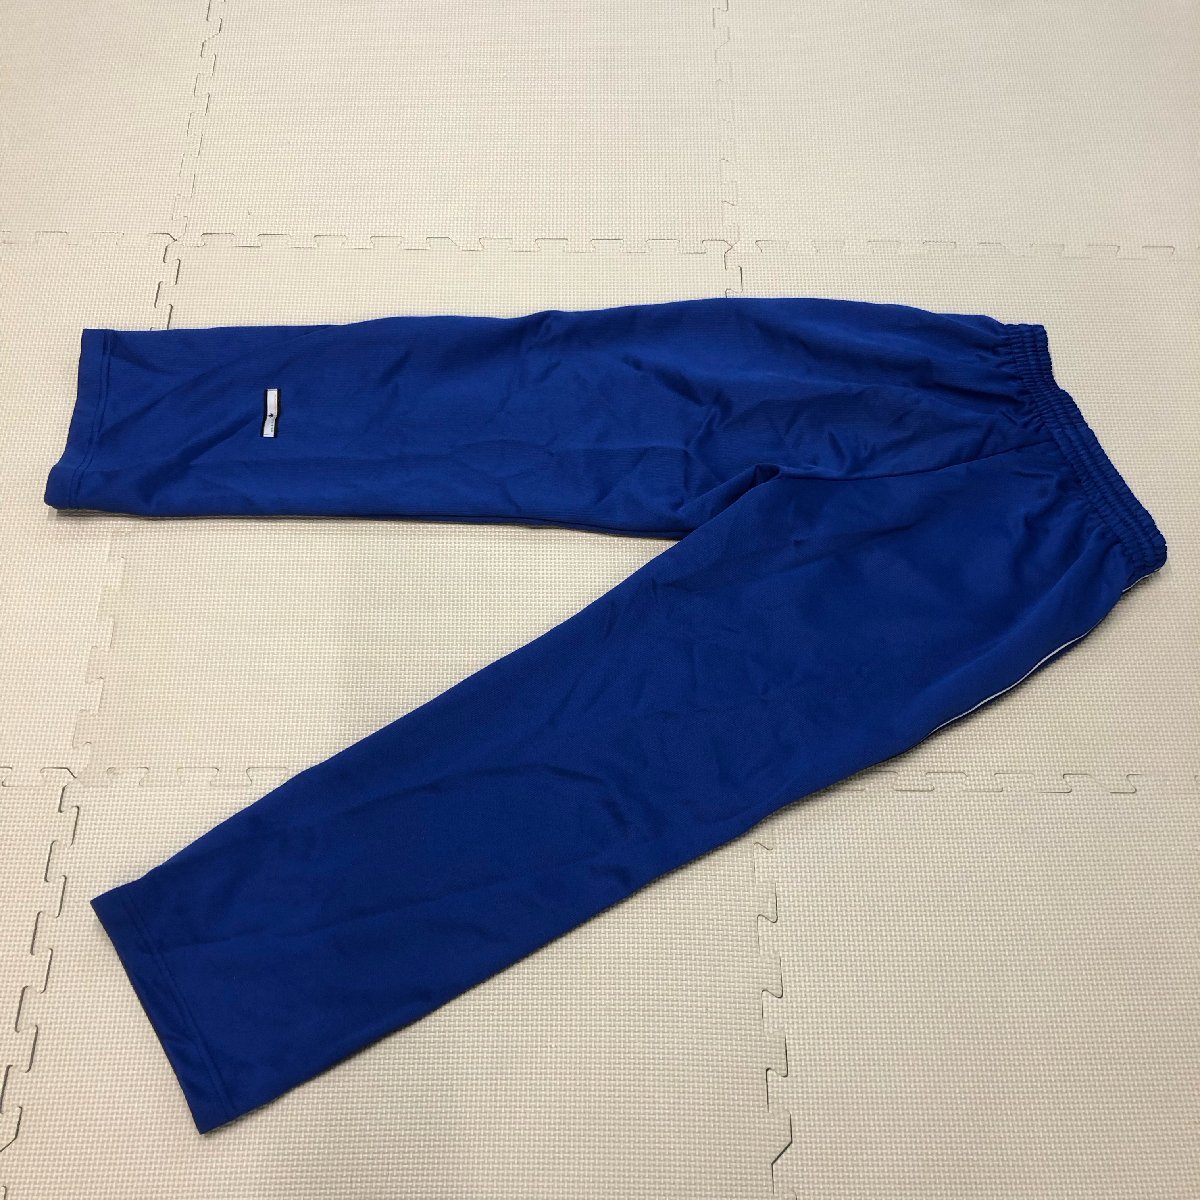 (G)MJ266 ( used ) Gunma prefecture Gunma university cooperation education part attached junior high school jersey top and bottom 5 point set / designation goods /M/ long sleeve / long trousers / shorts / Descente / gym uniform 